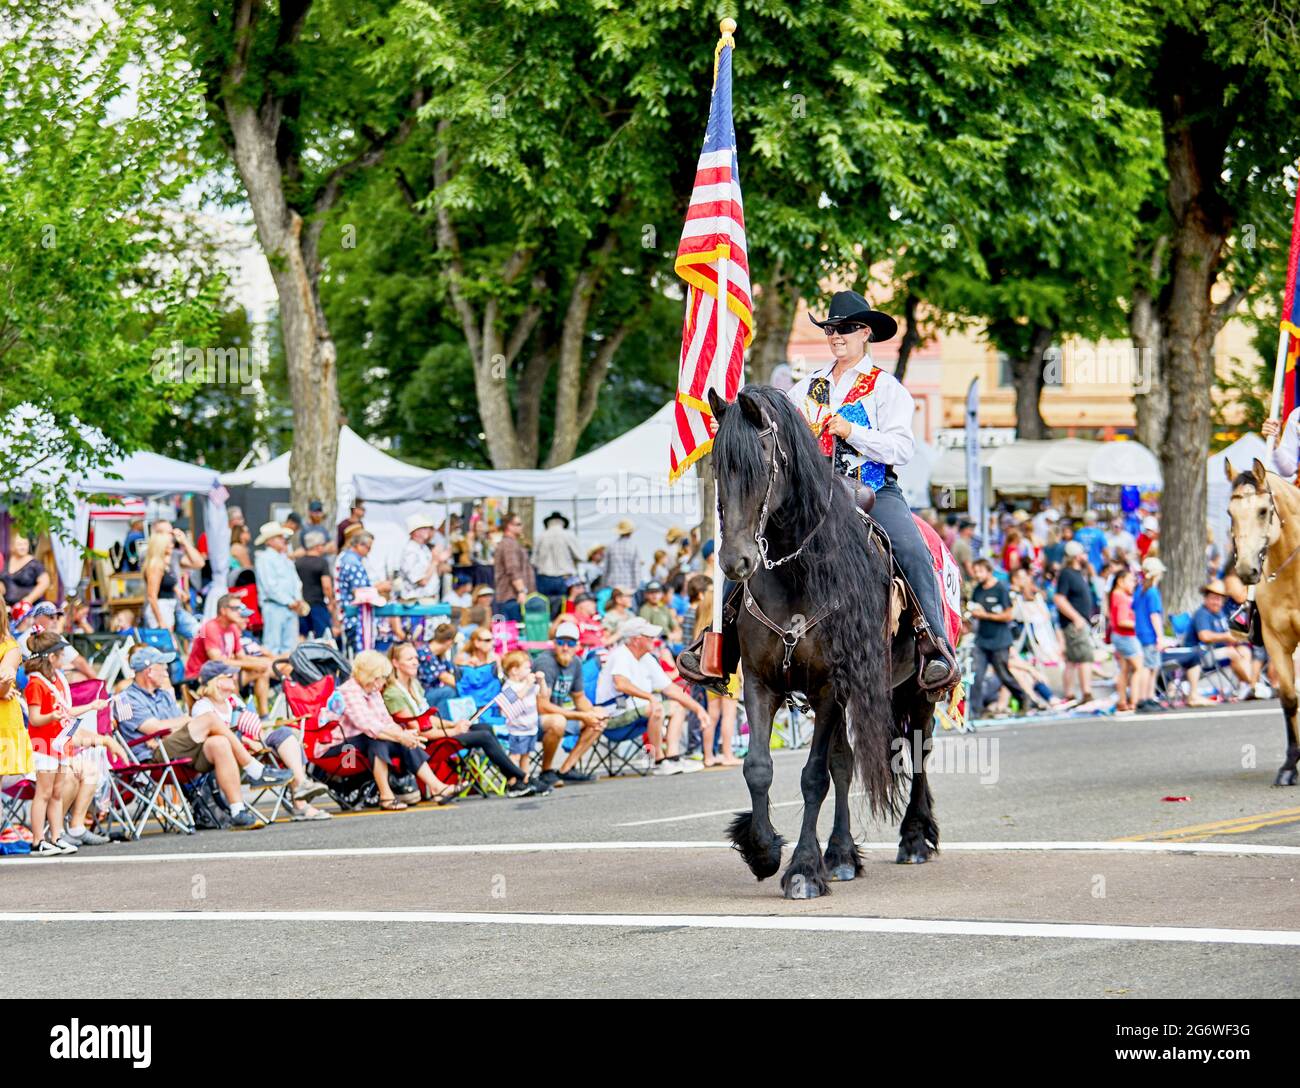 Prescott, Arizona, USA - July 3, 2021: Equestrian rider carrying an American flag while on horseback in the 4th of July parade Stock Photo